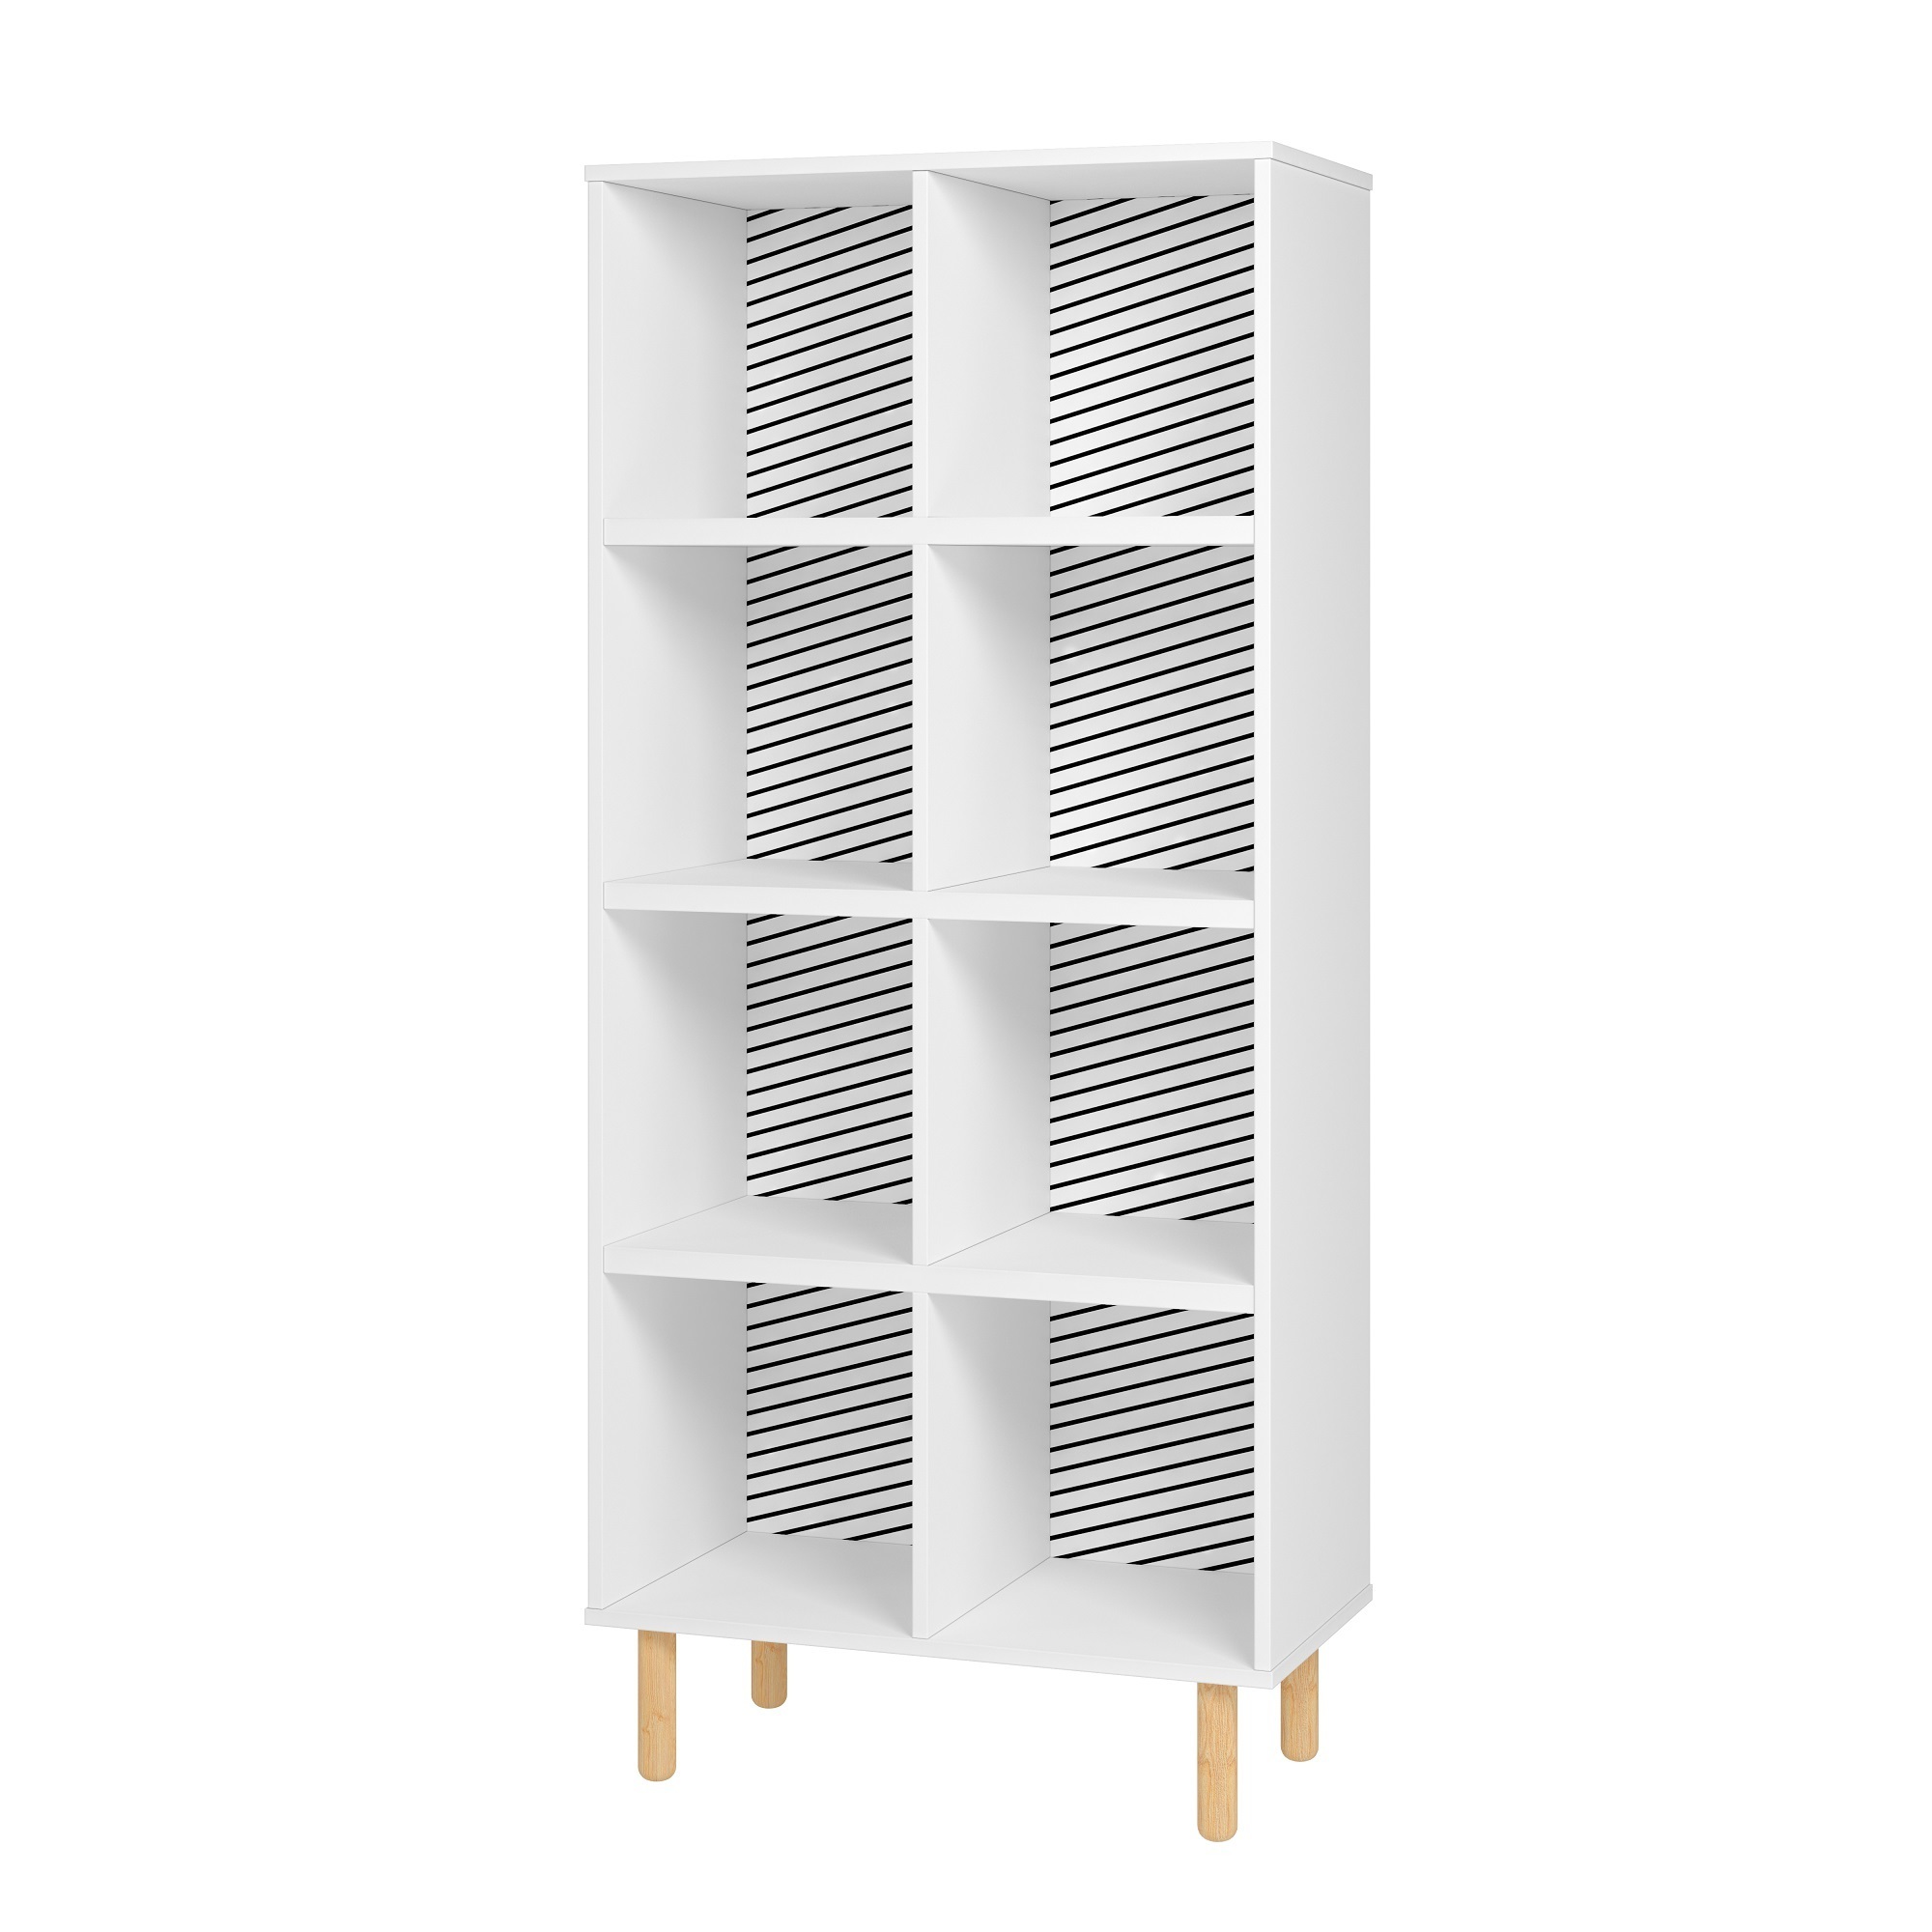 Manhattan Comfort, Essex 60.23 Double Bookcase 8 Shelves in Zebra, Height 60.23 in, Shelves (qty.) 8 Material MDPE, Model 409AMC